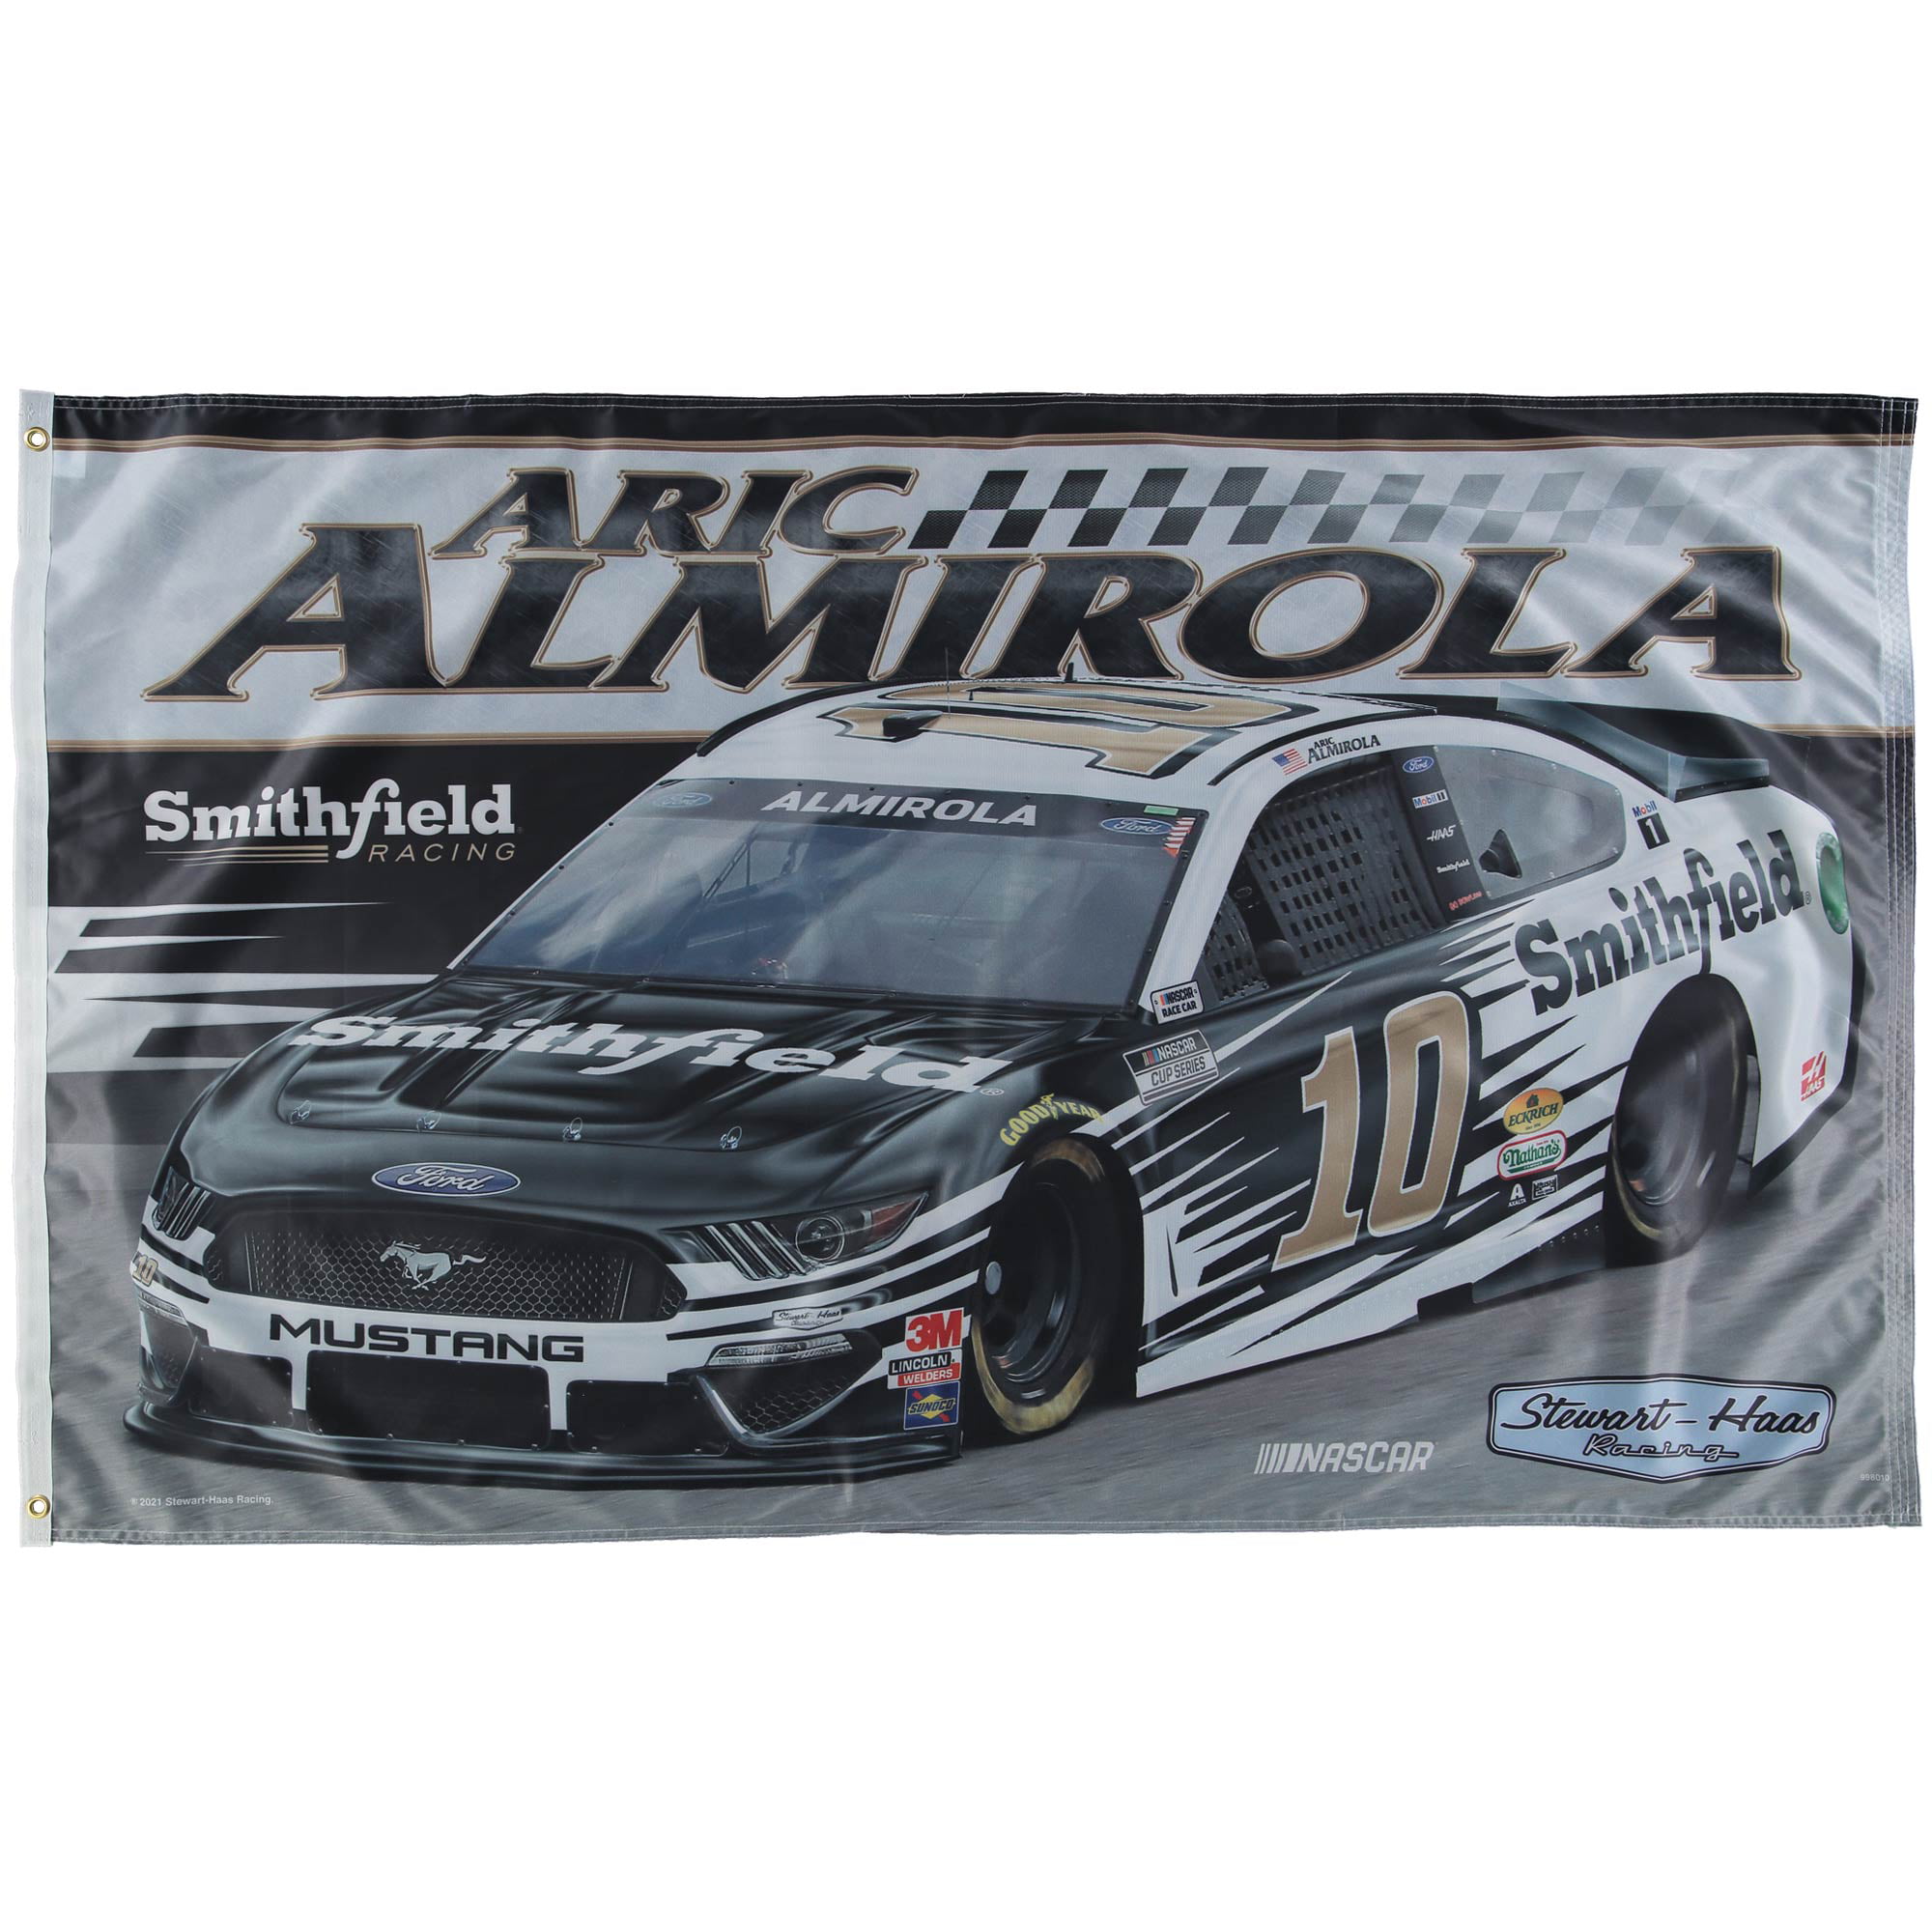 2021 1/64 #10 Aric Almirola “Smithfield“ Mustang ALL DIECAST BODY & CHASSIS 